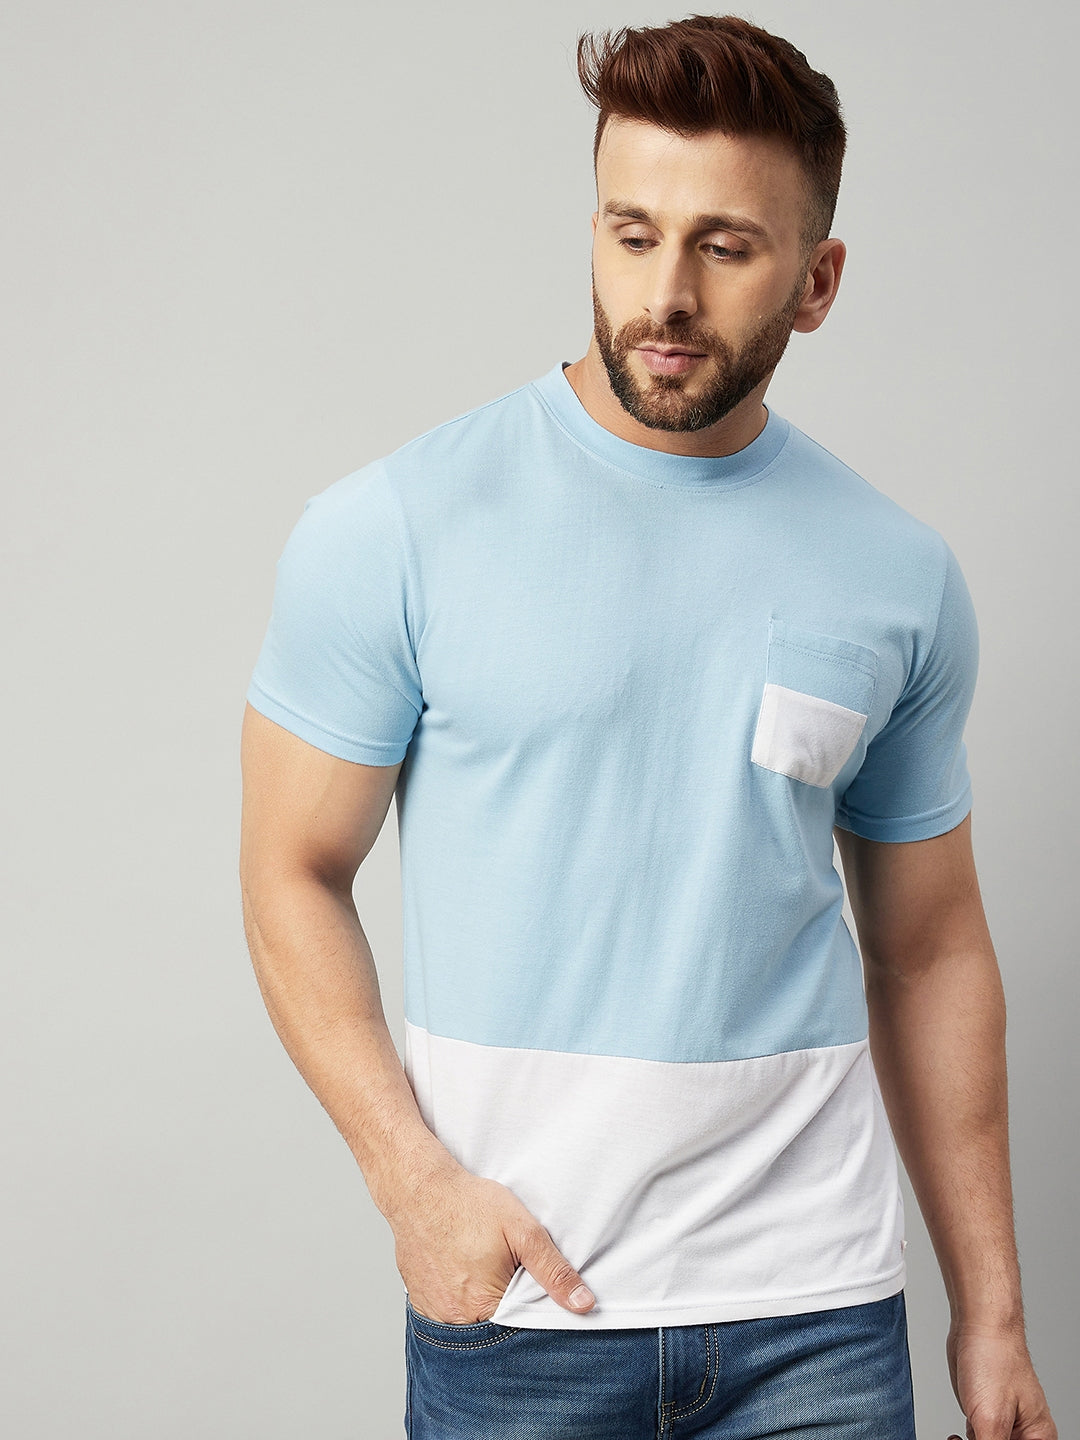 Sky Blue and White Round Neck  Color Block T-Shirt